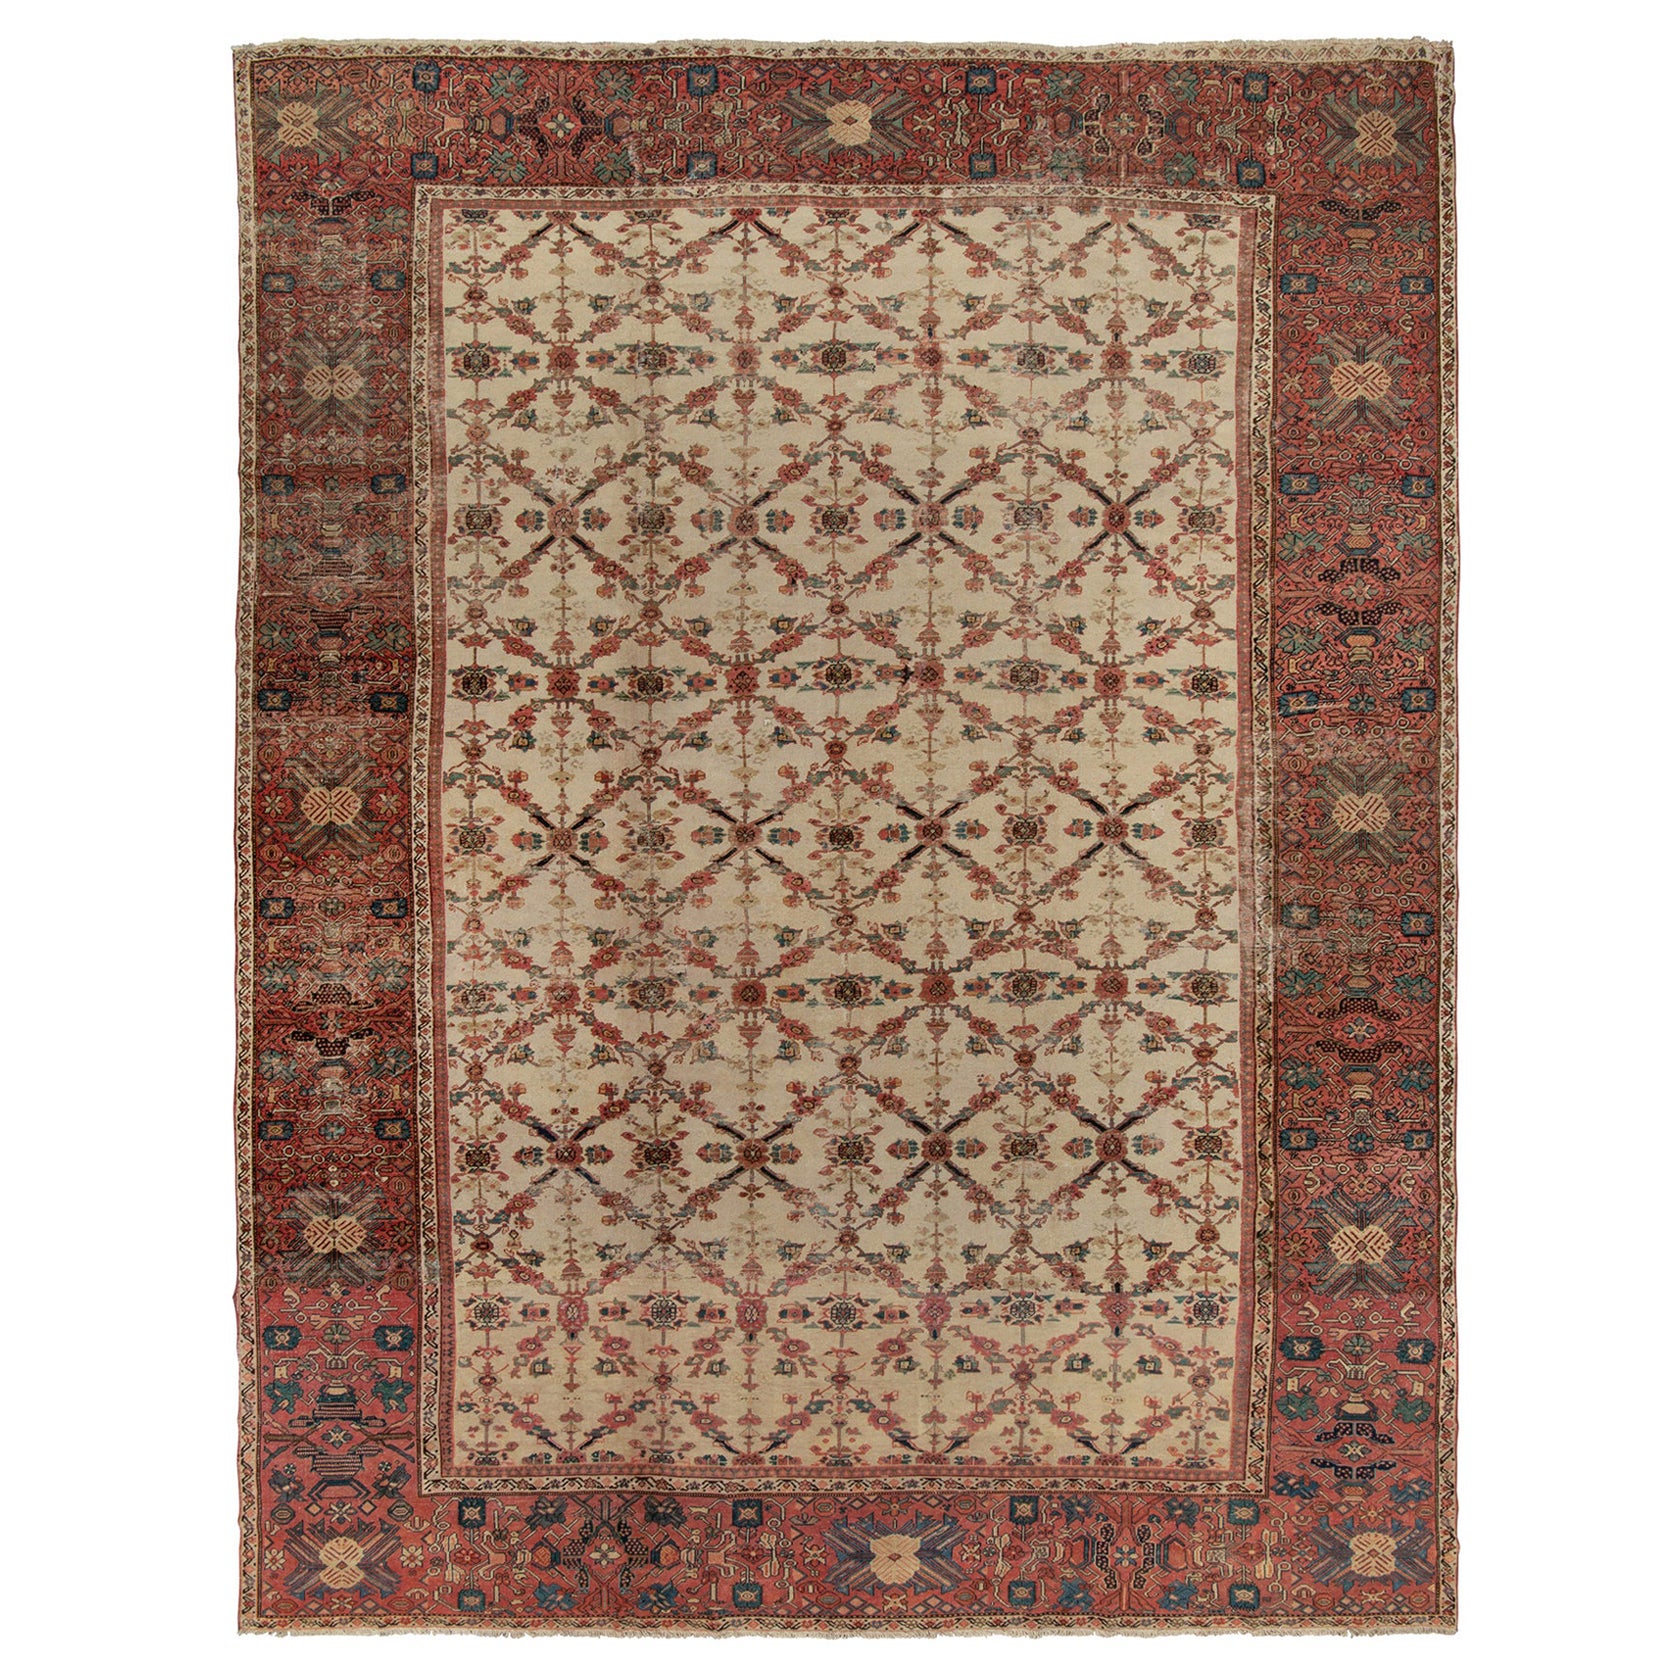 Antique Persian Sultanabad Rug in Beige and Red Floral Patterns